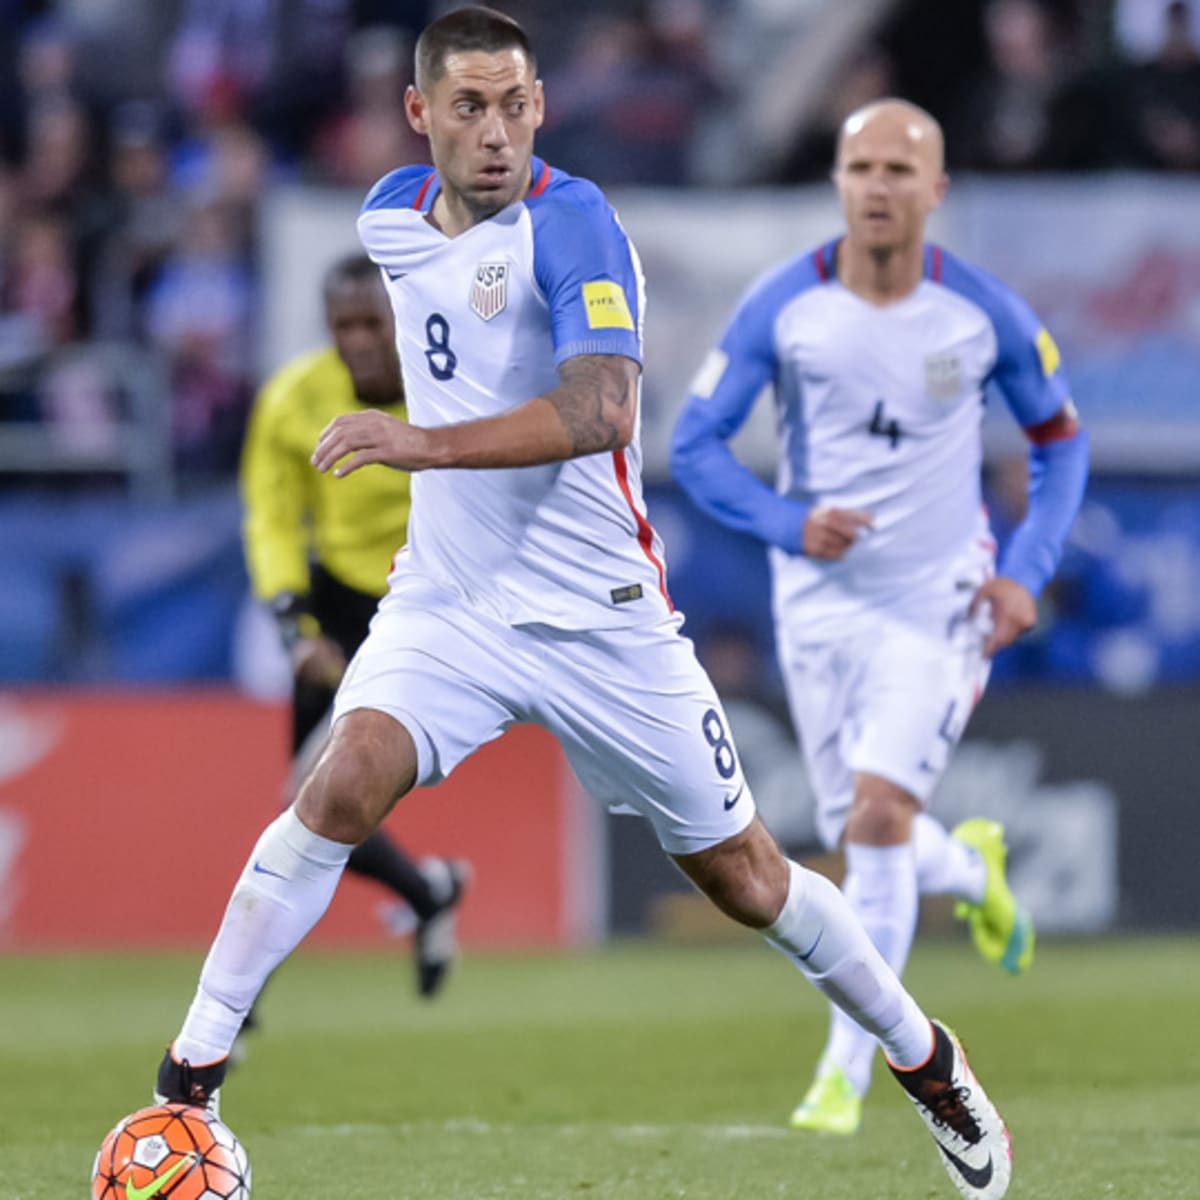 Clint Dempsey backs USMNT to reach the knockout stages at the